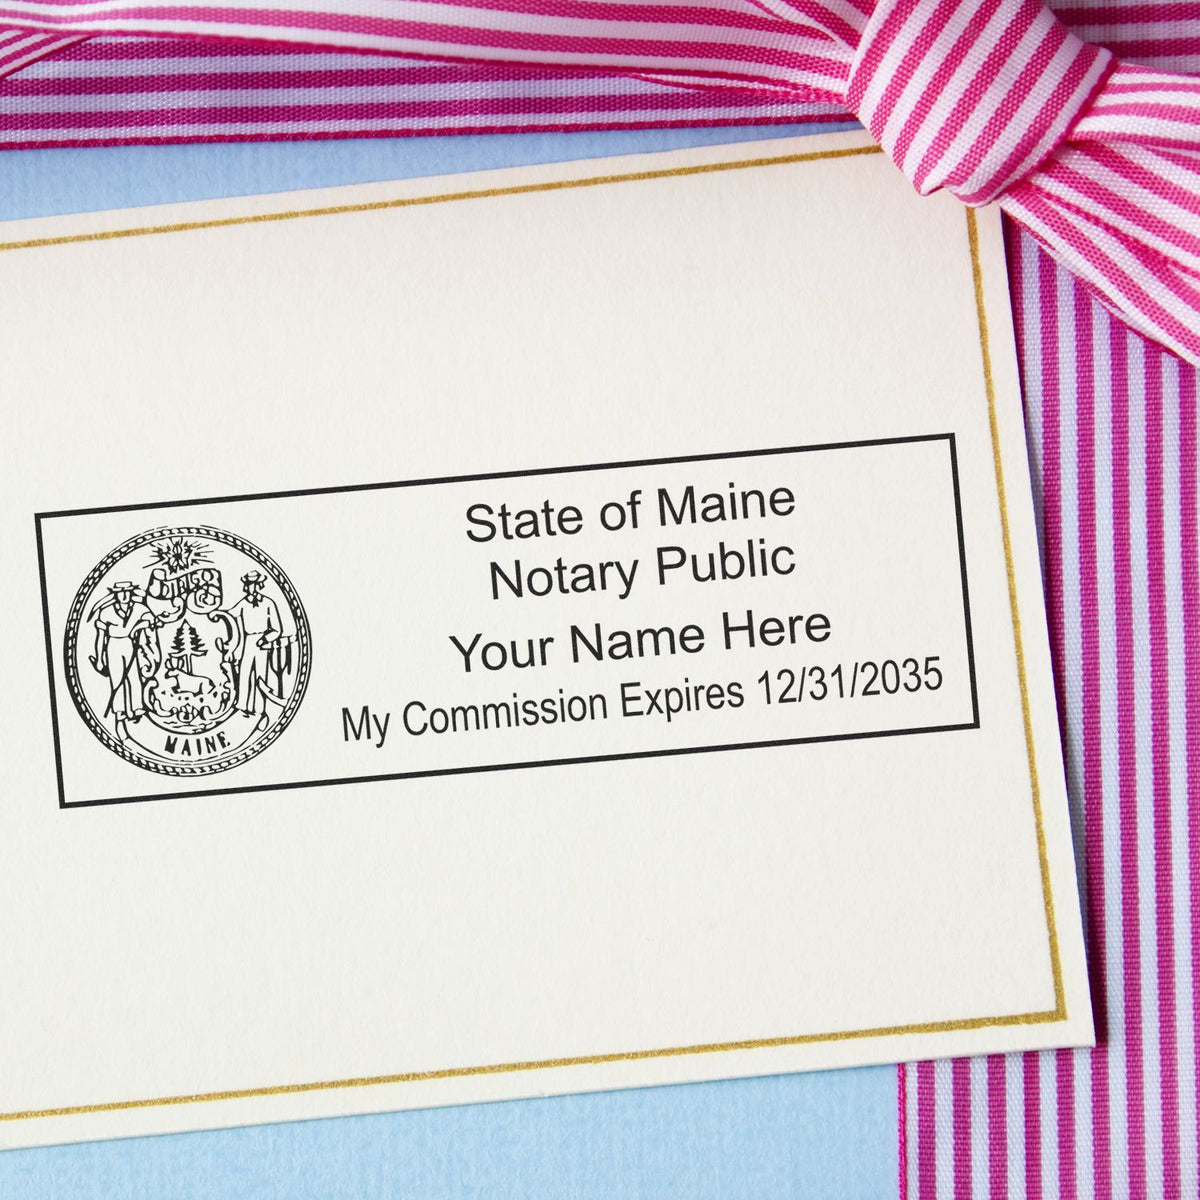 The Slim Pre-Inked State Seal Notary Stamp for Maine stamp impression comes to life with a crisp, detailed photo on paper - showcasing true professional quality.